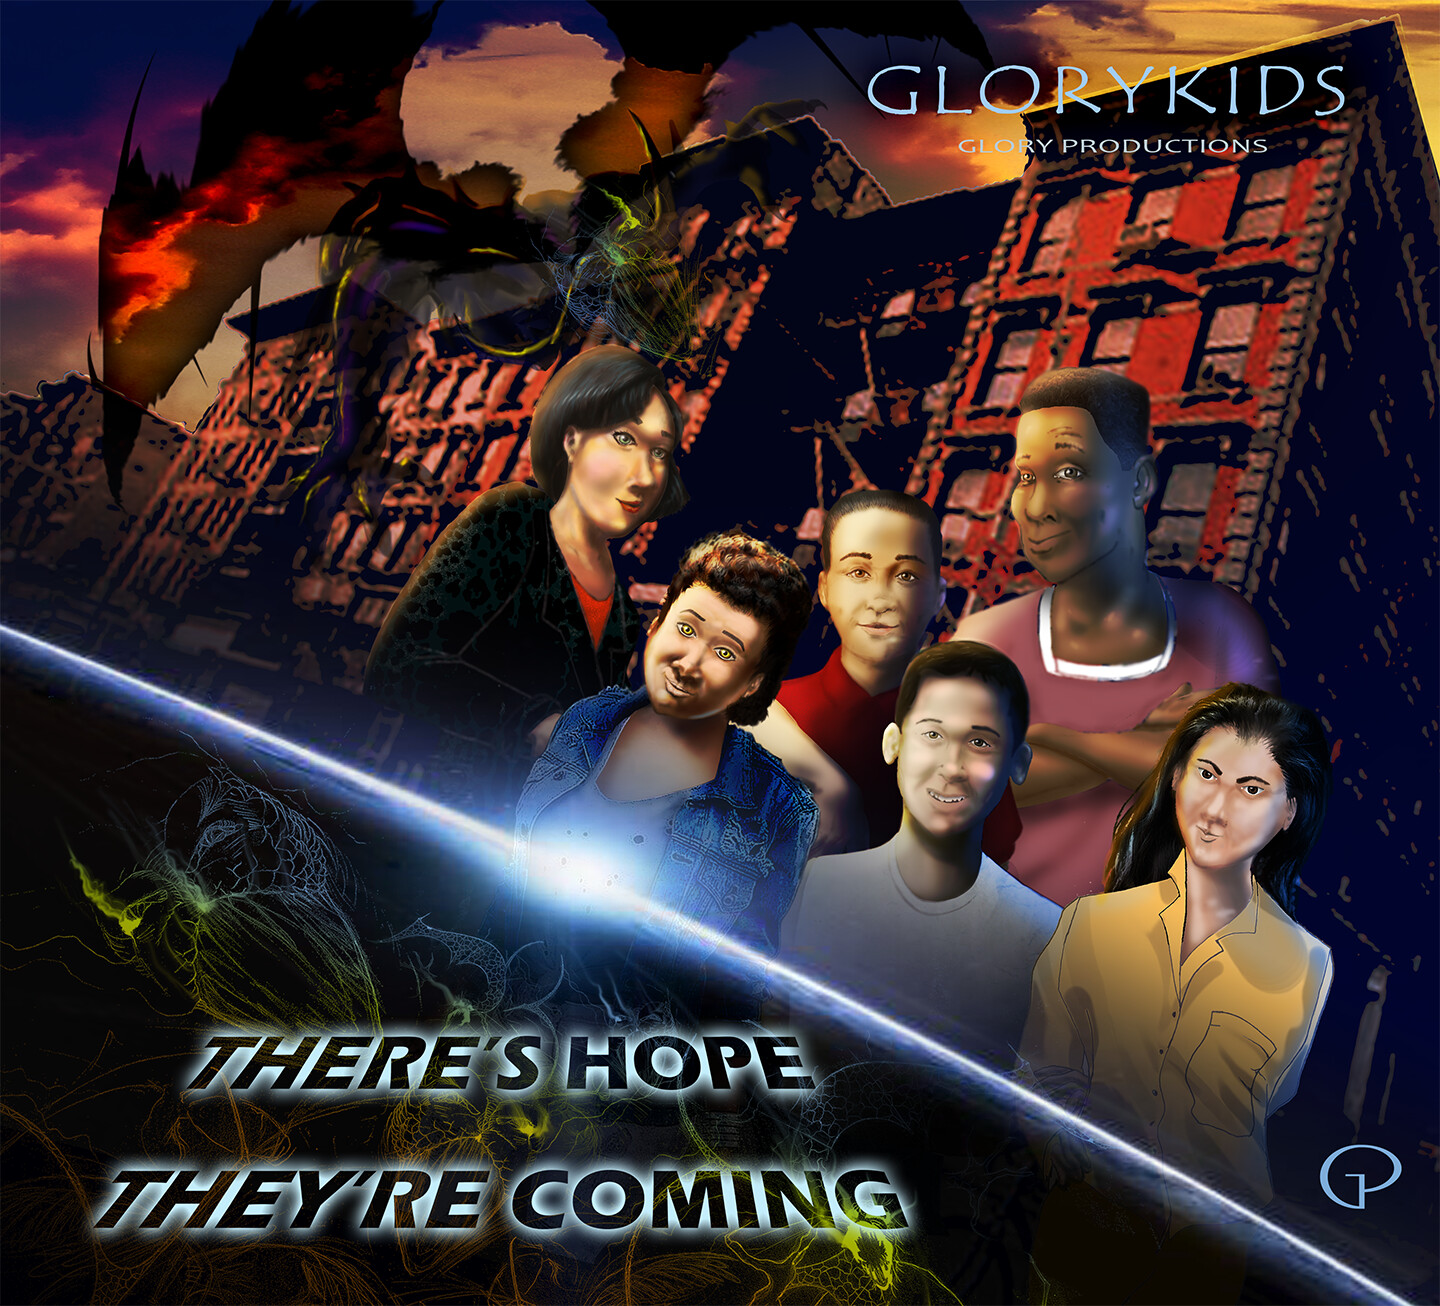 Glorykids - An Exciting New Series